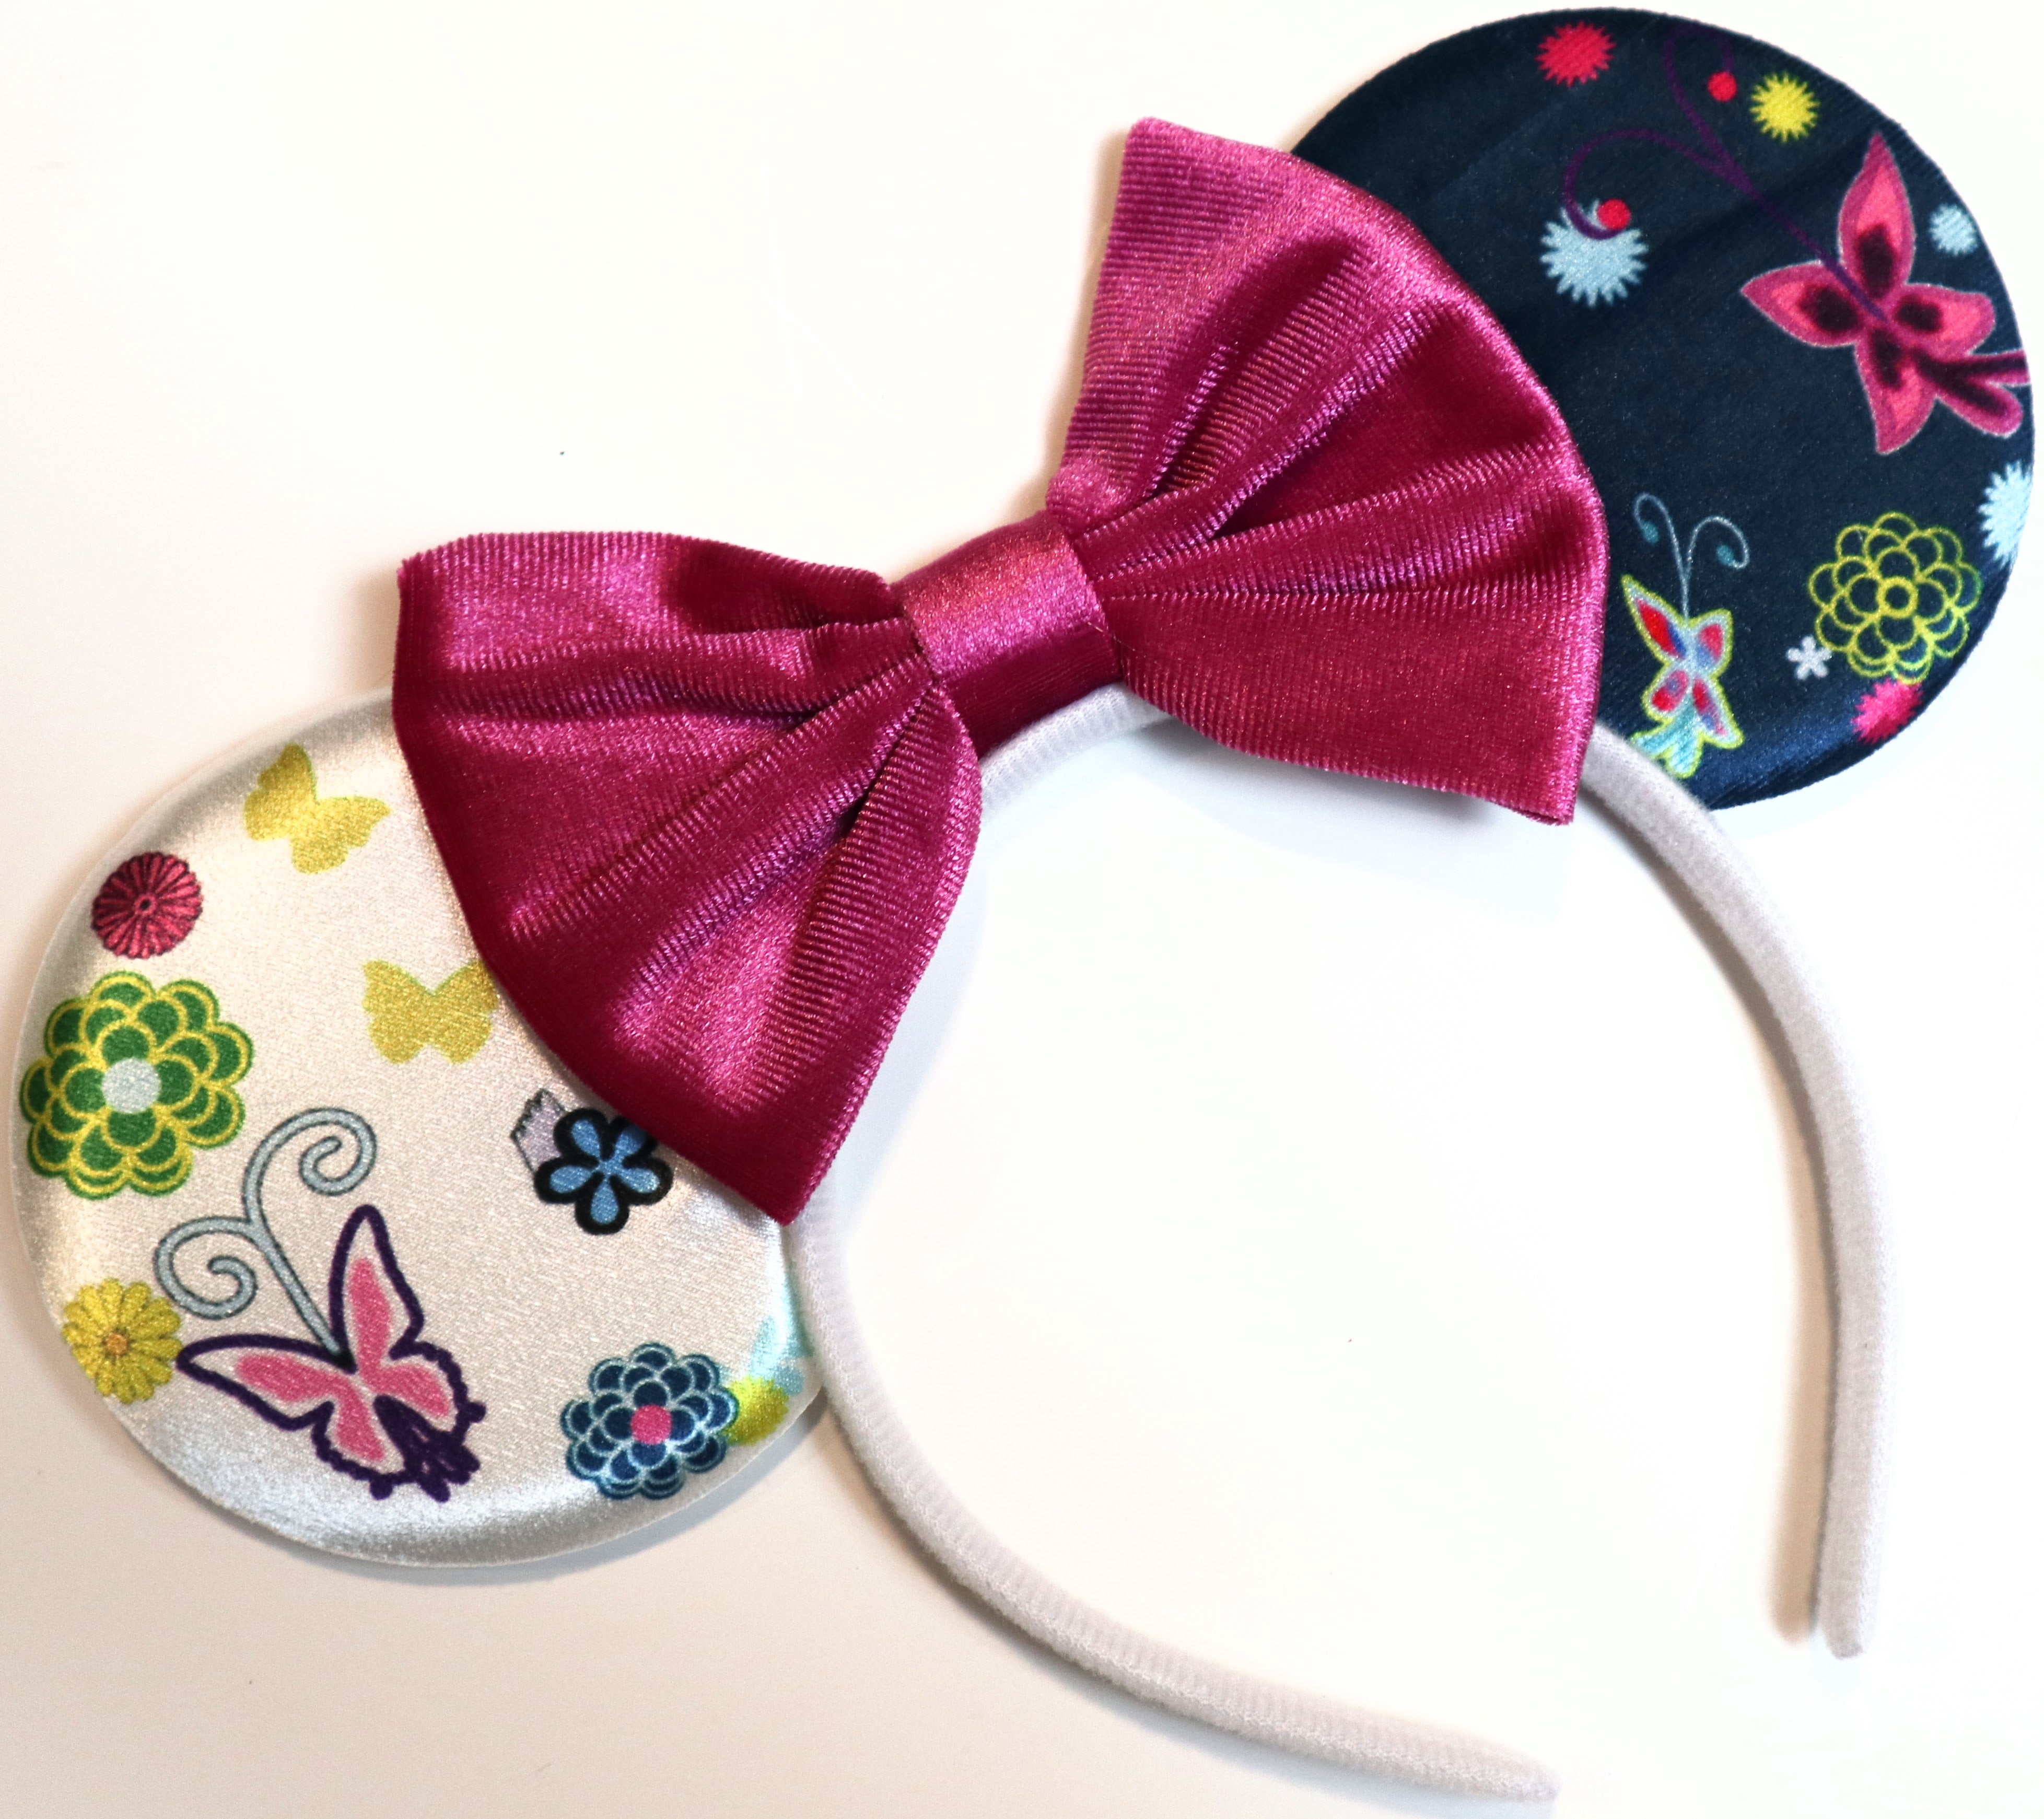 Details about   UP Grape Soda Cap Balloons 2020 Limited Party Minnie Ears Disney Parks Headband 